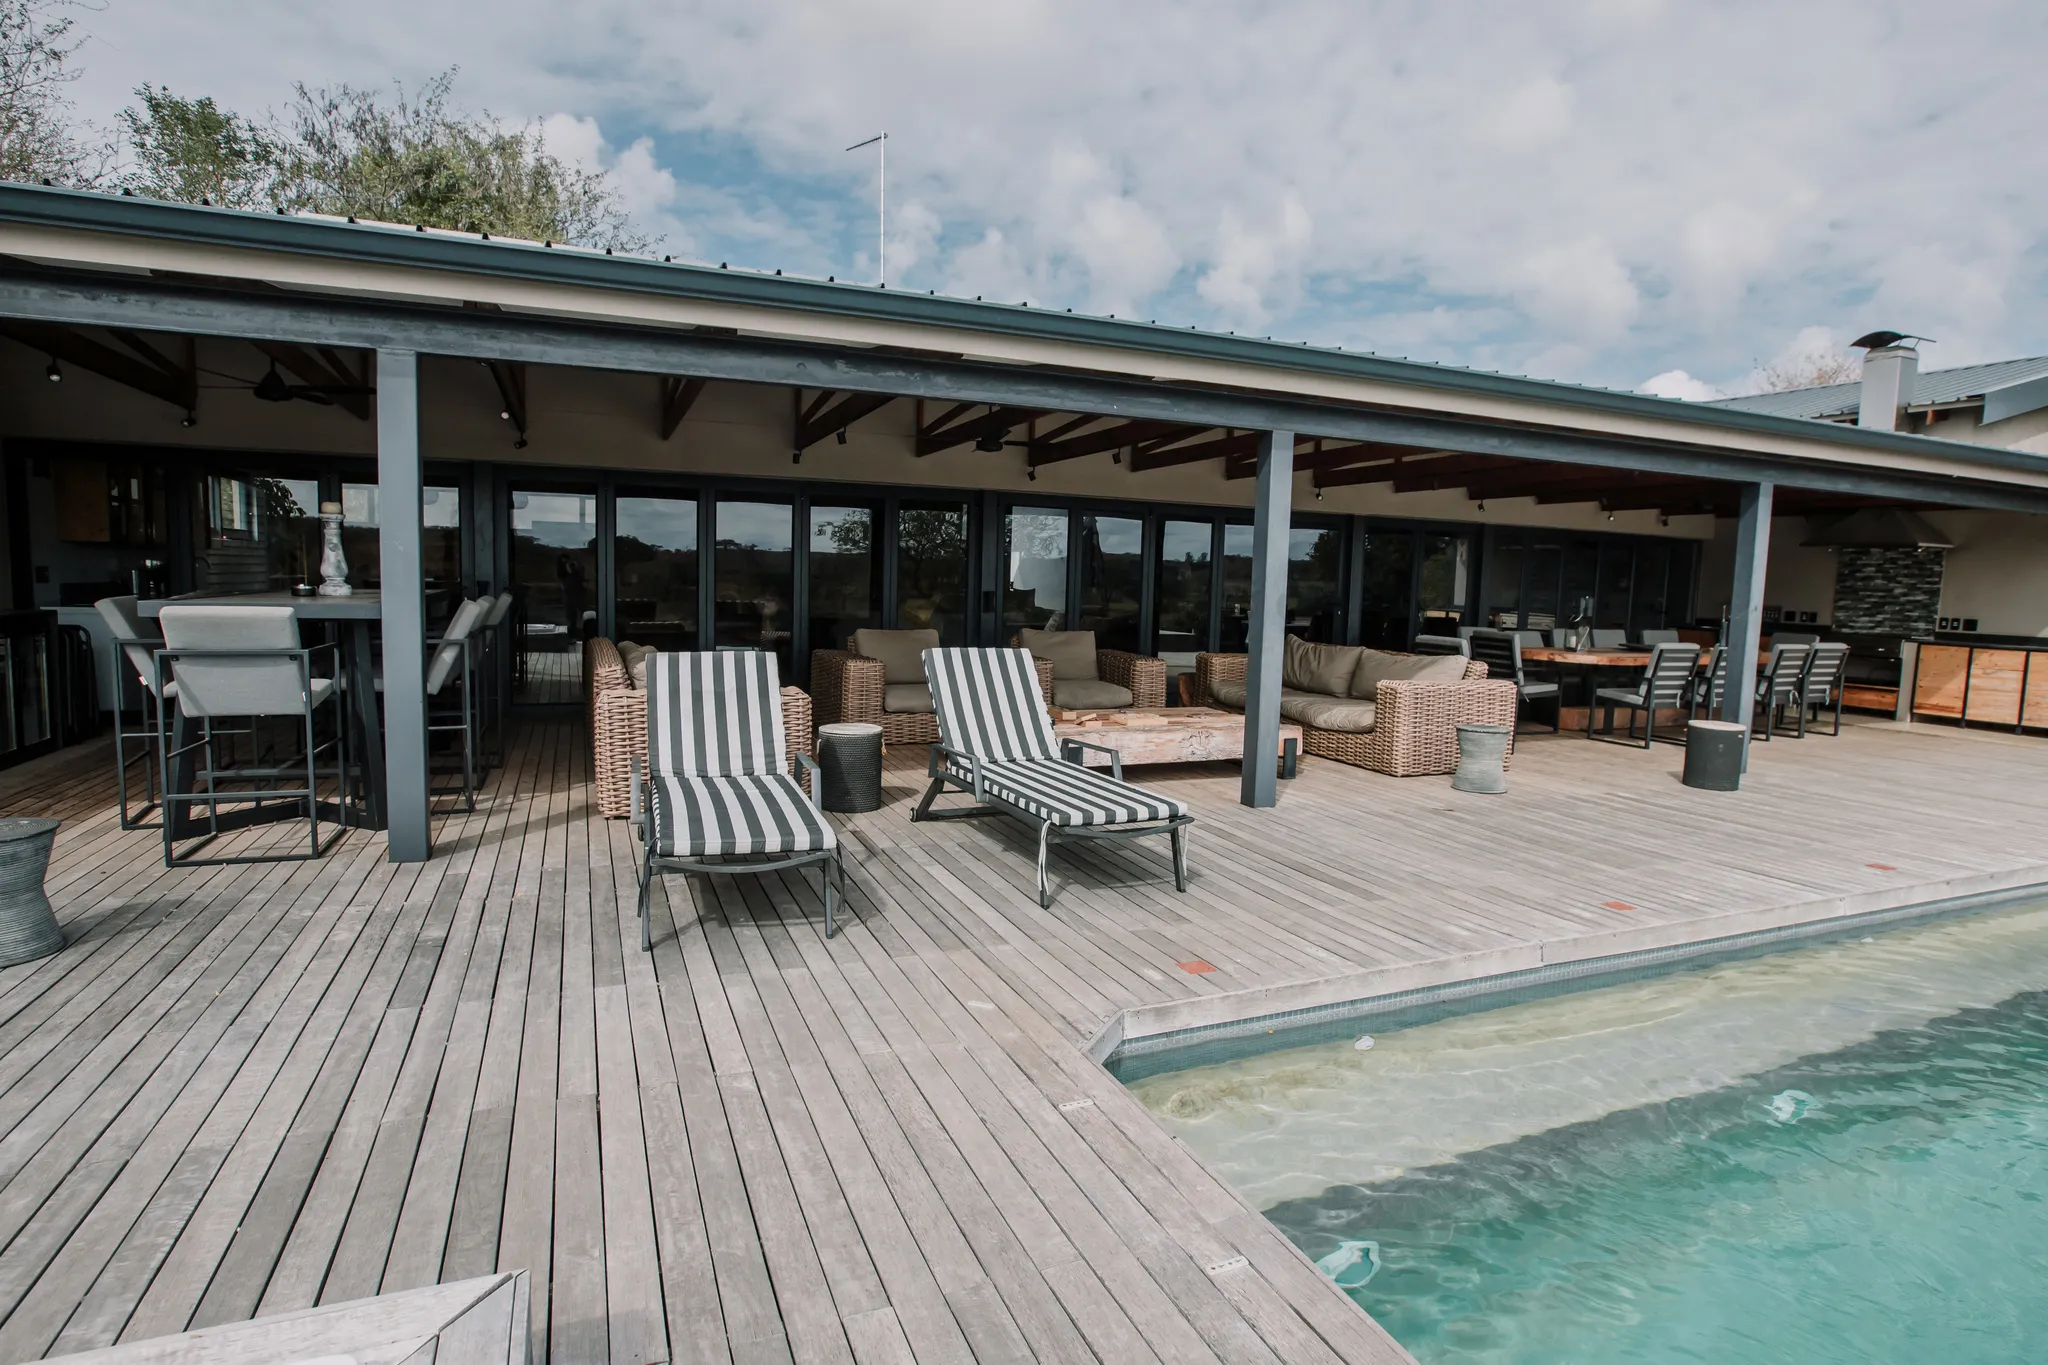 A pool area with a wooden deck, deck chairs and a covered patio with outdoor furniture.